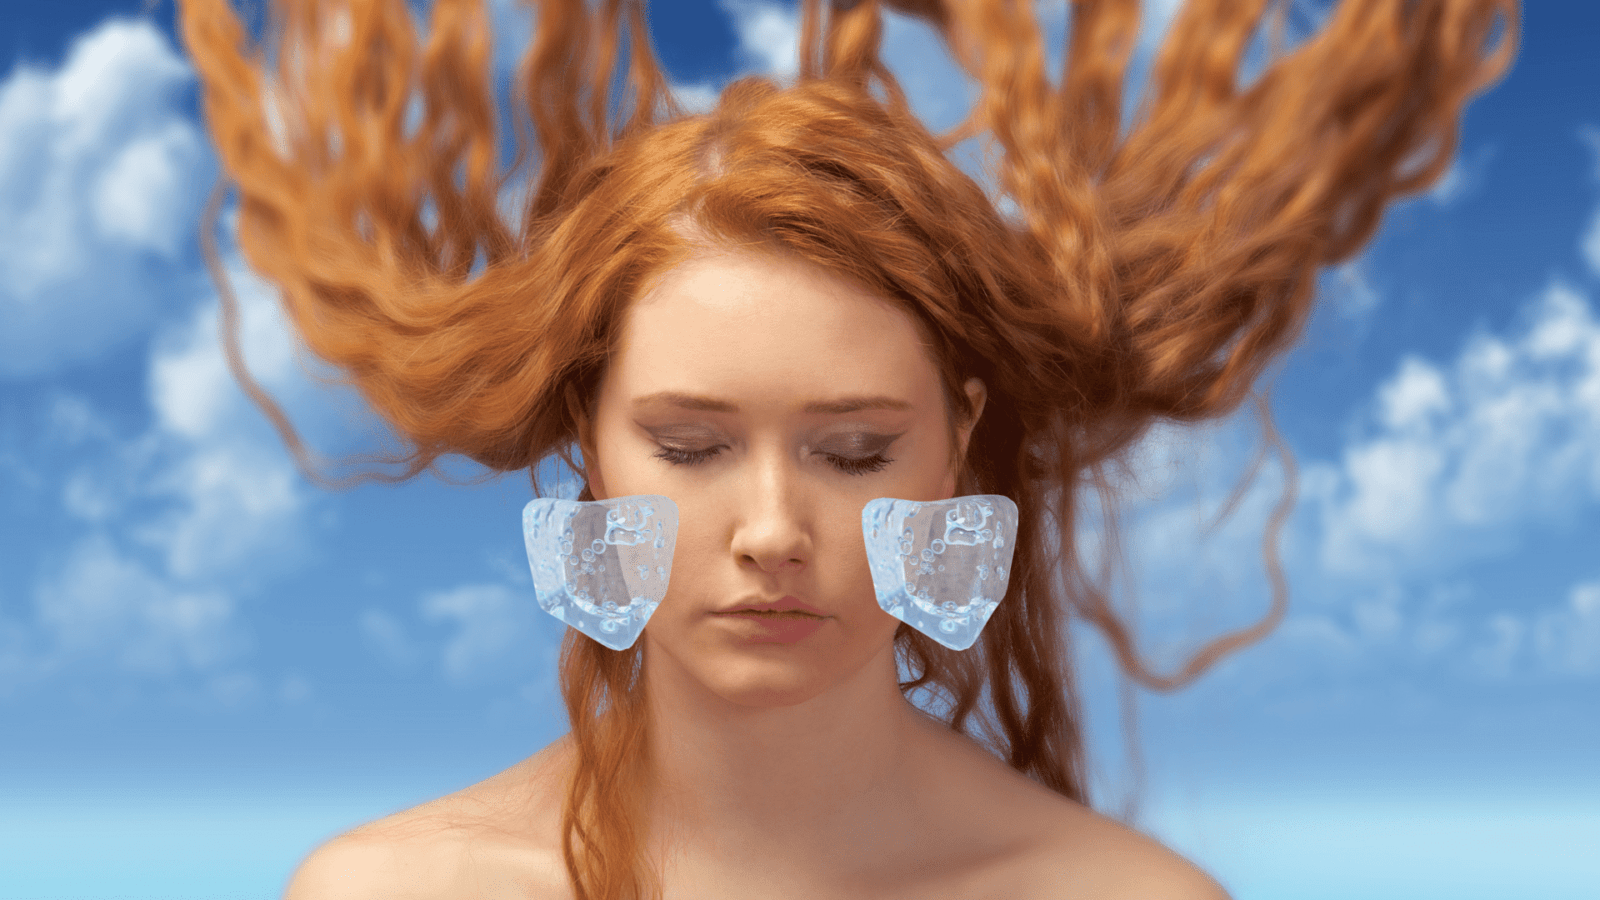 Facial Icing: Is Ice Good for Redhead Skin?